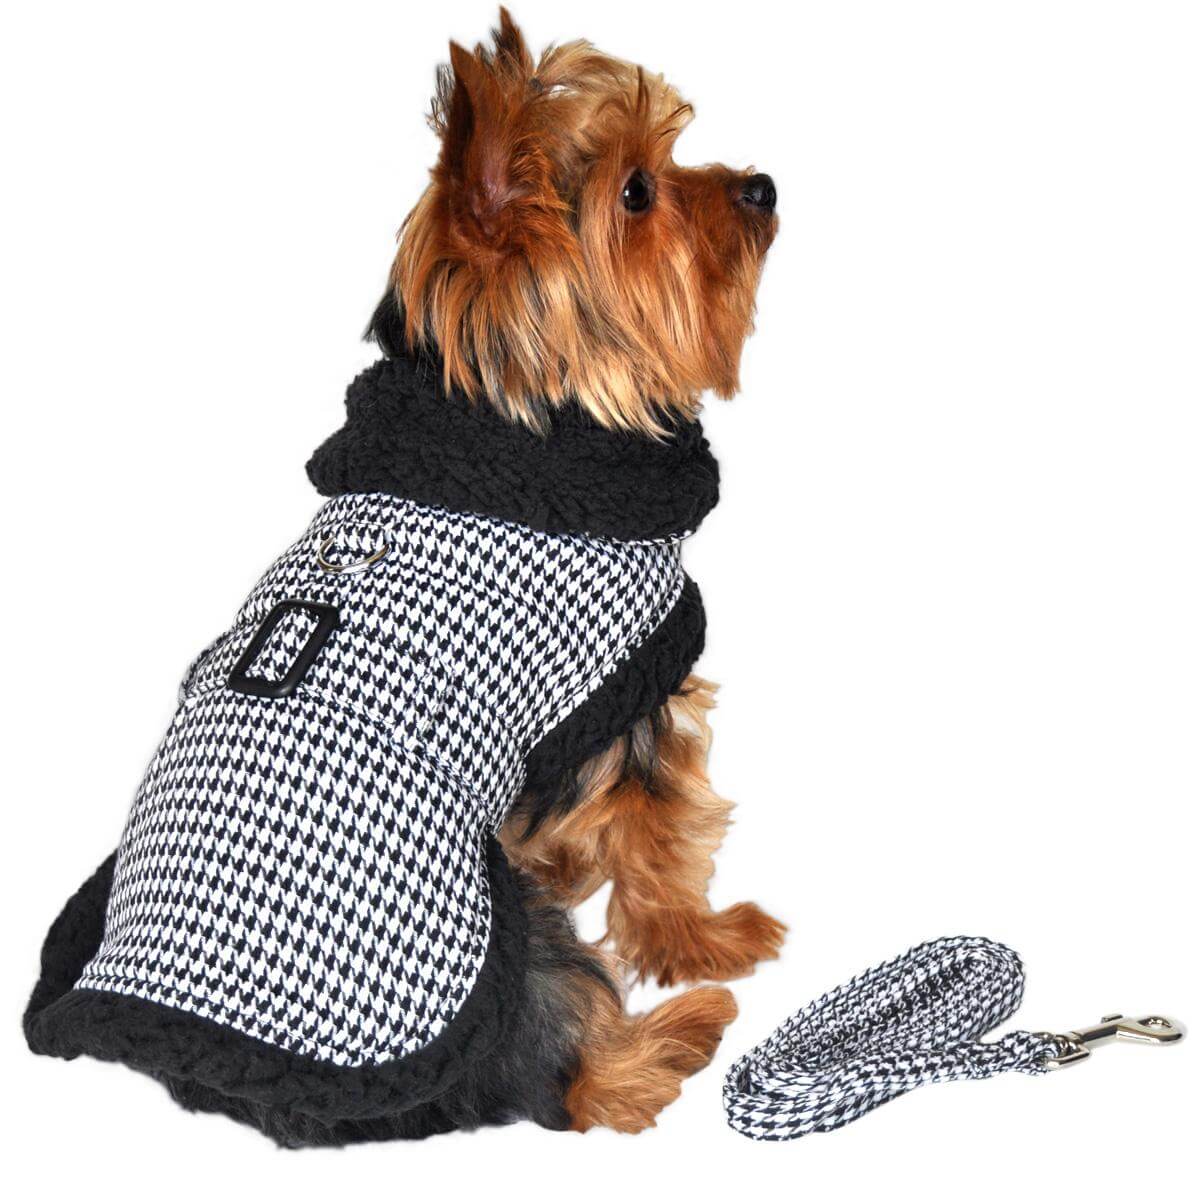 Black and White Houndstooth Harness Coat with Matching Leash - Waggy Pups